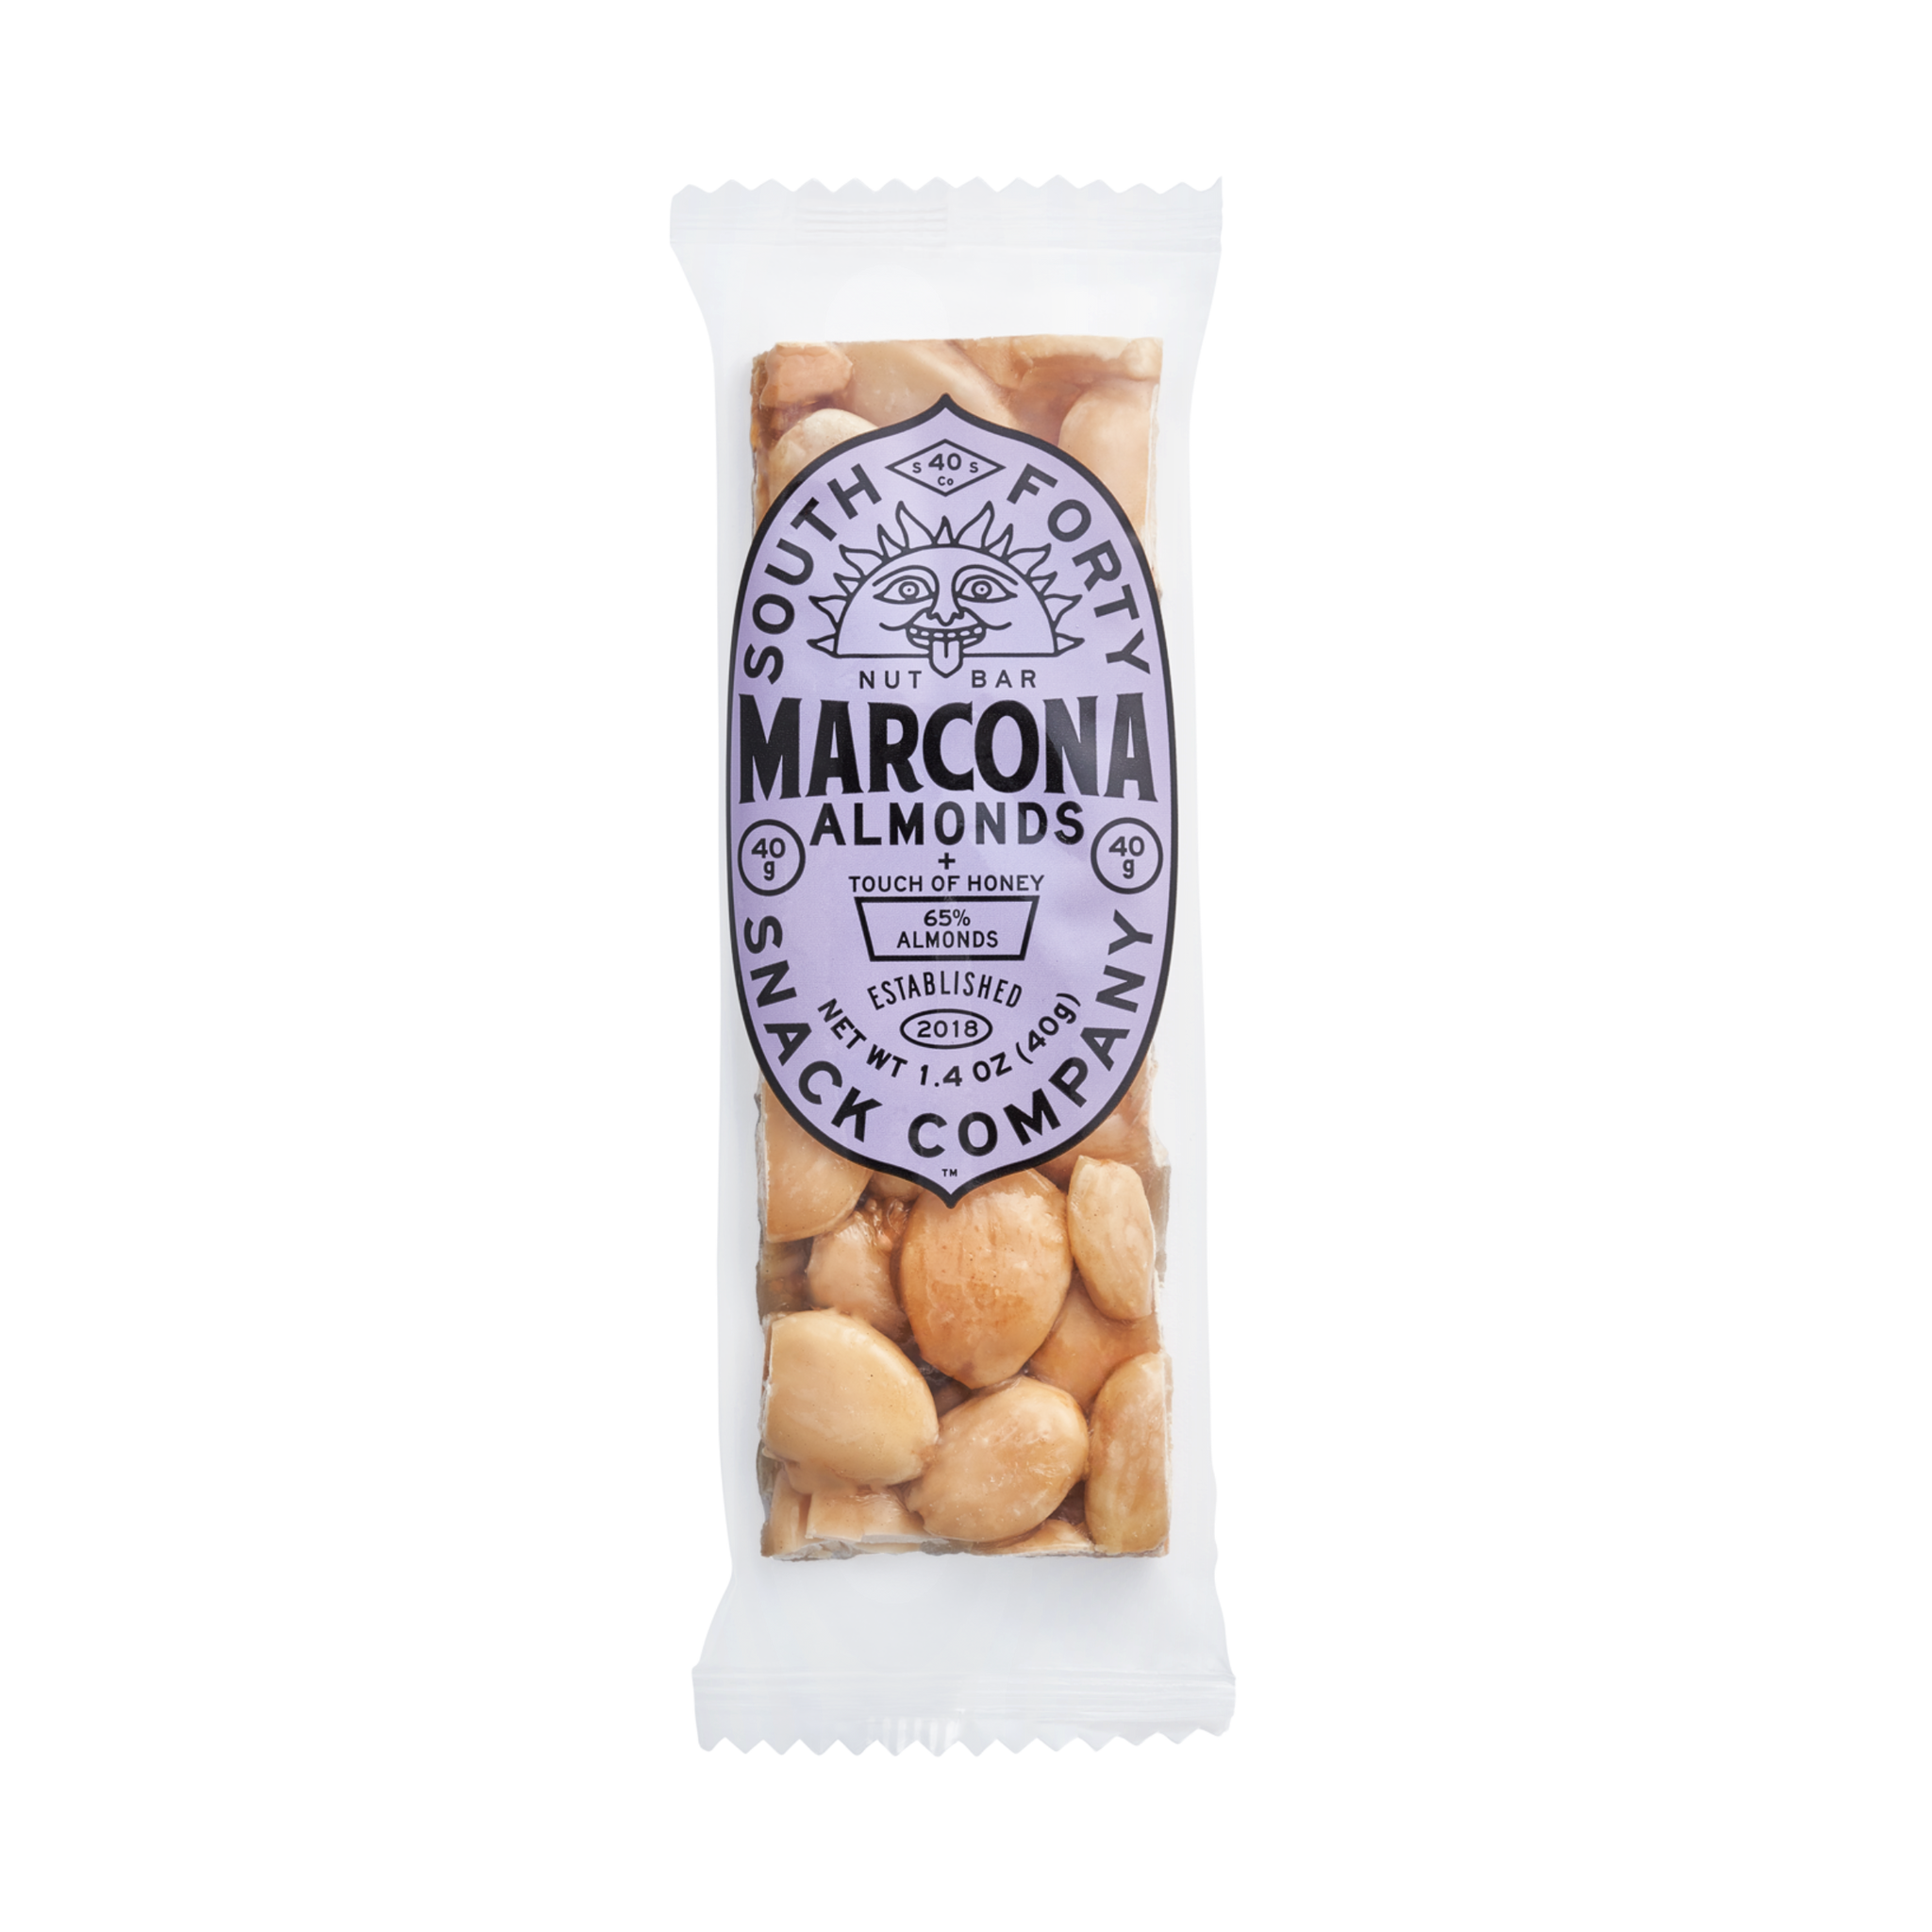 Marcona Almond 12-Pack